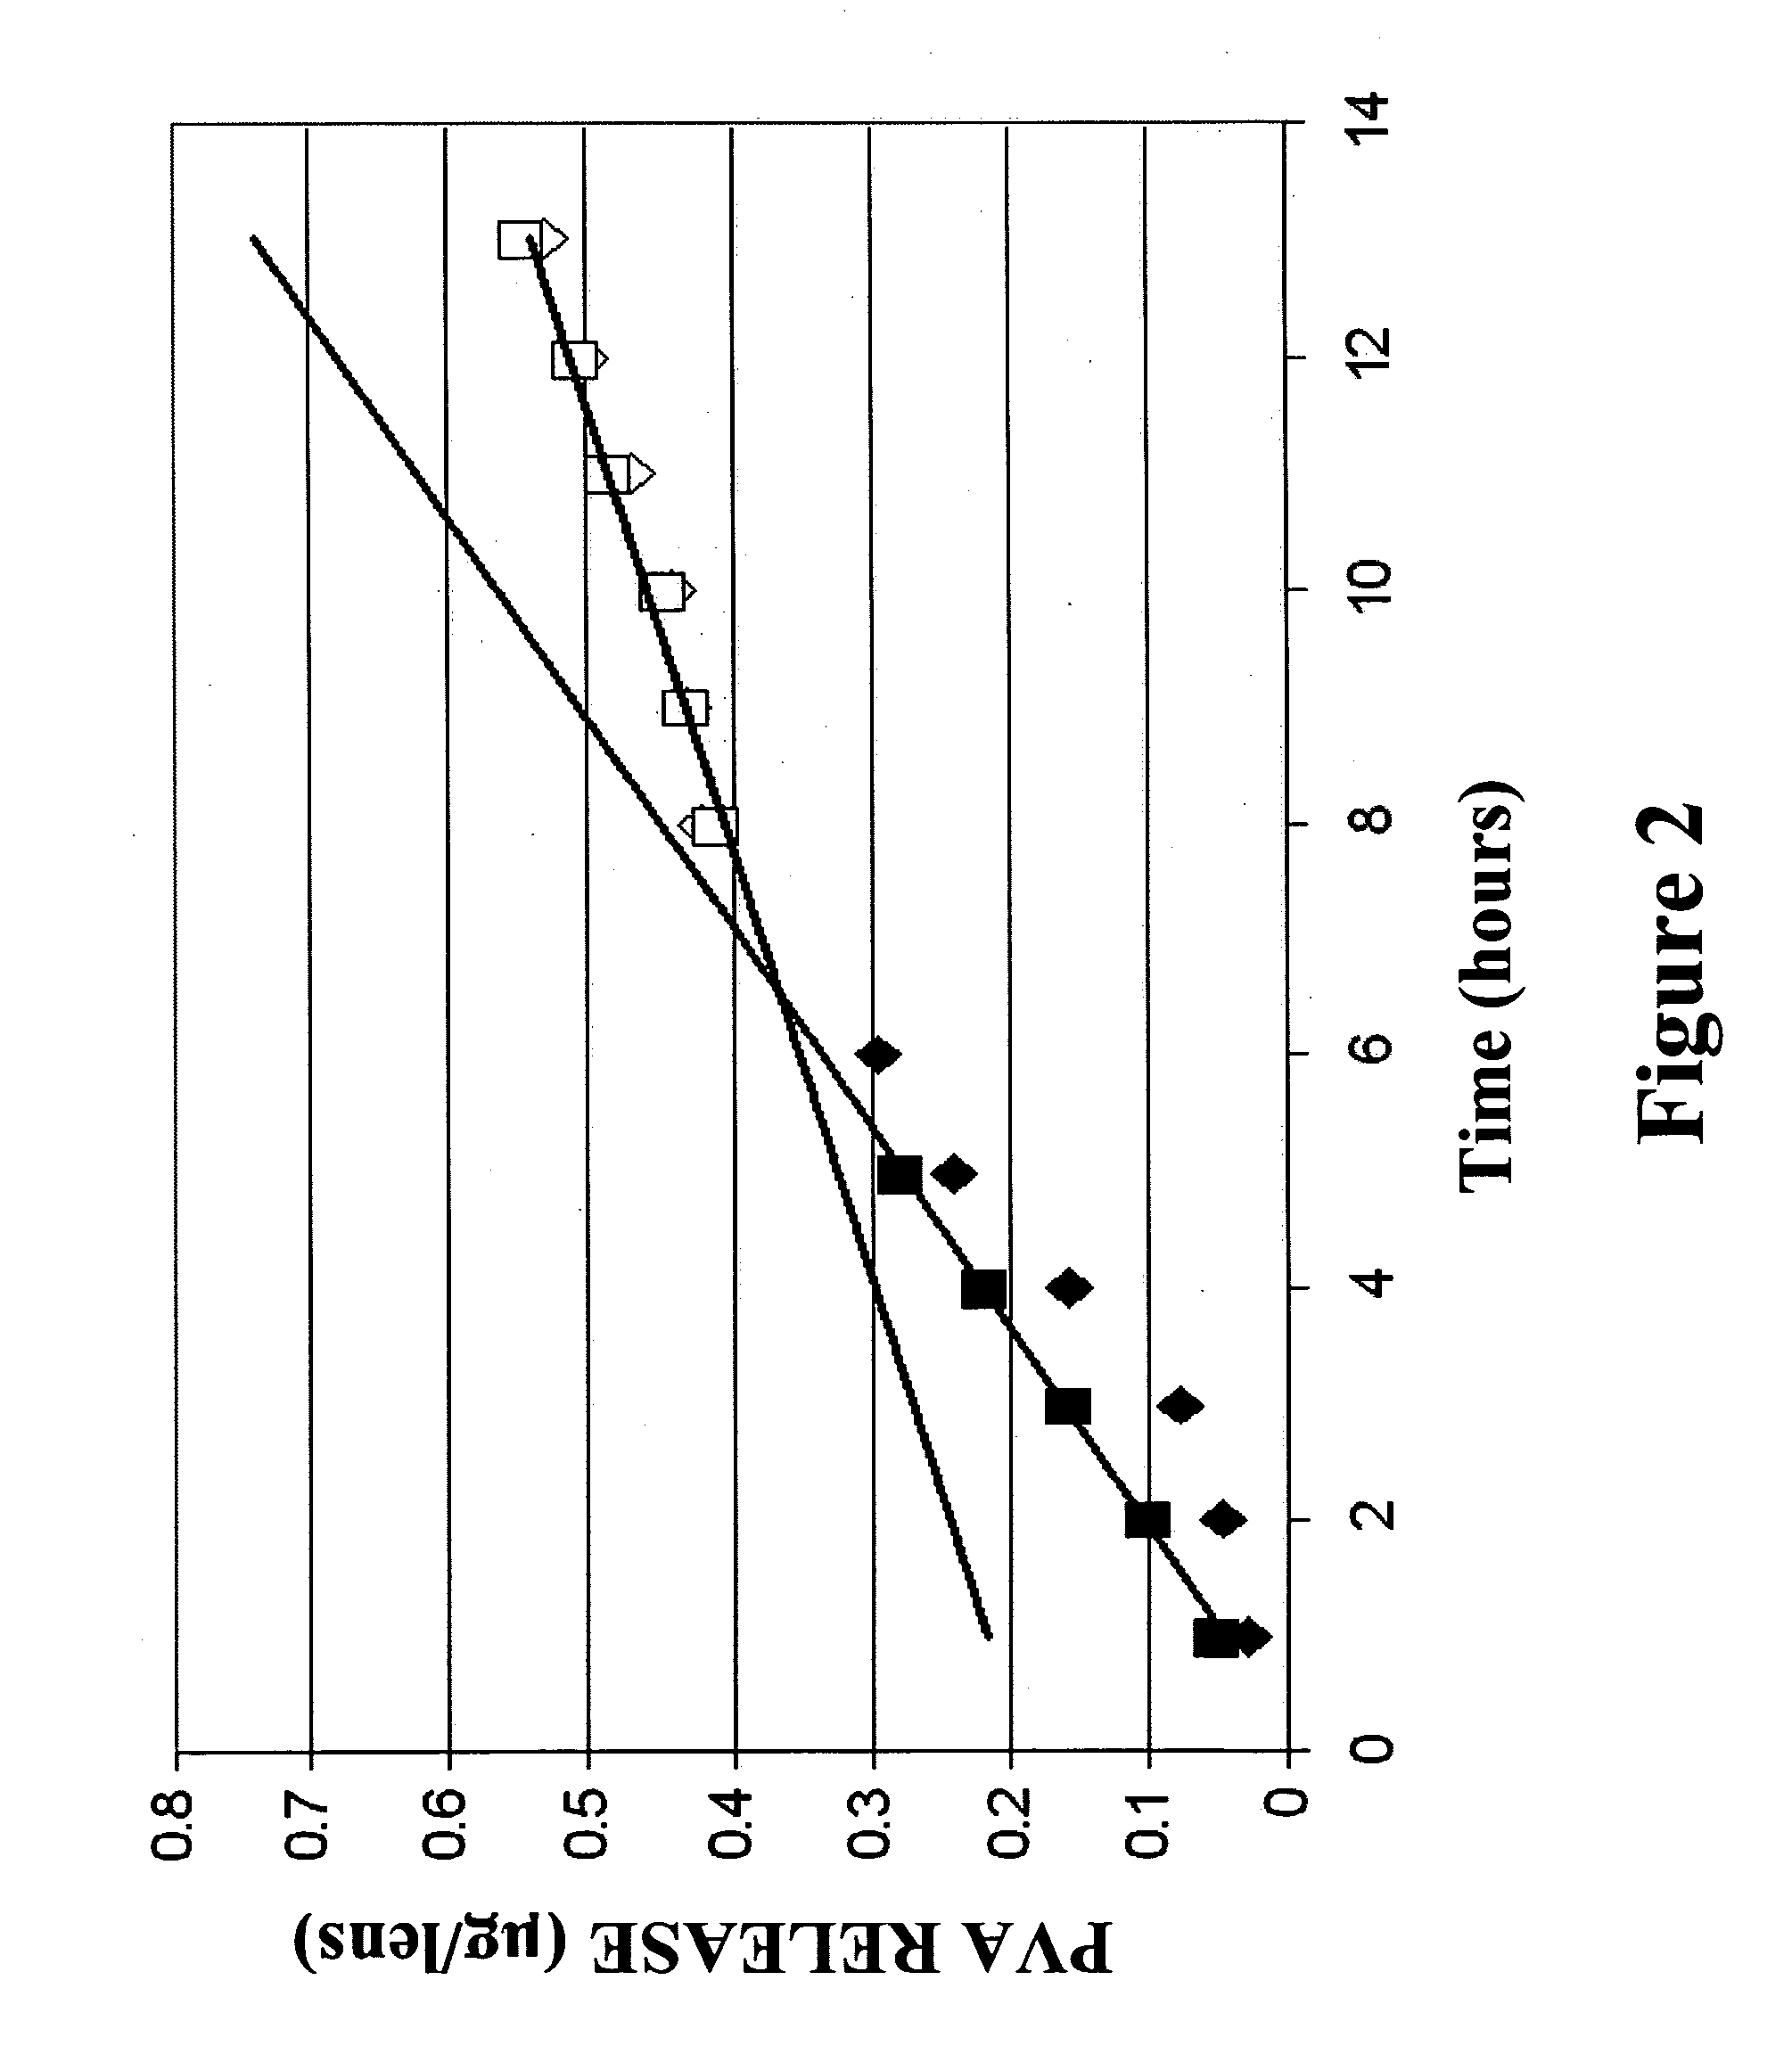 Ophthalmic devices for sustained delivery of active compounds